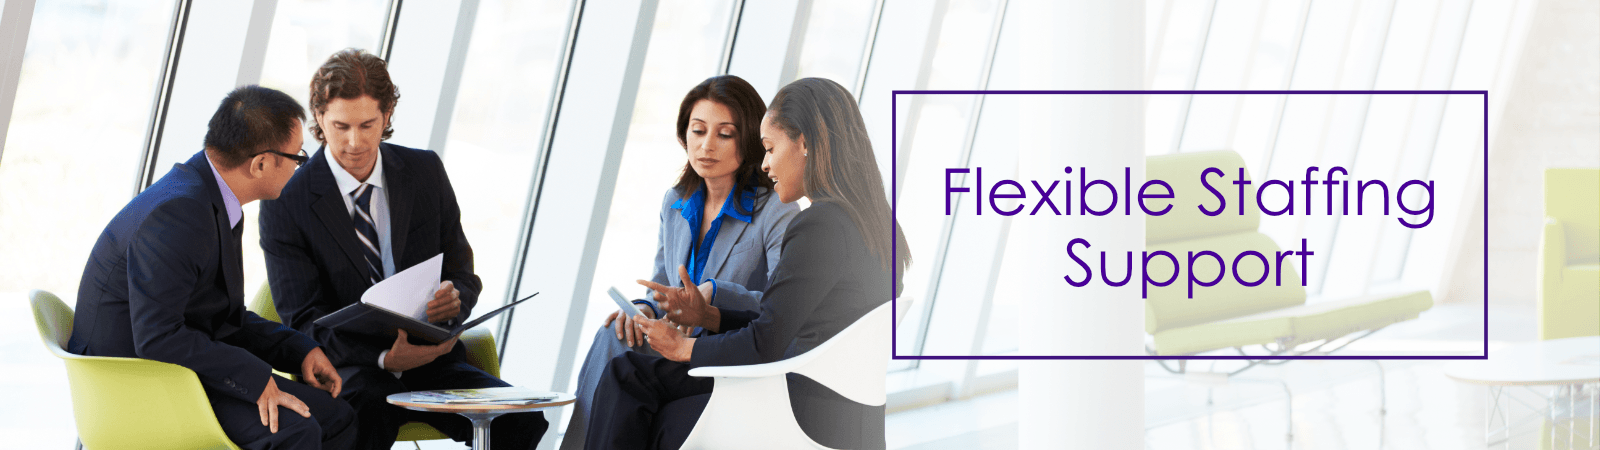 flexible staffing support